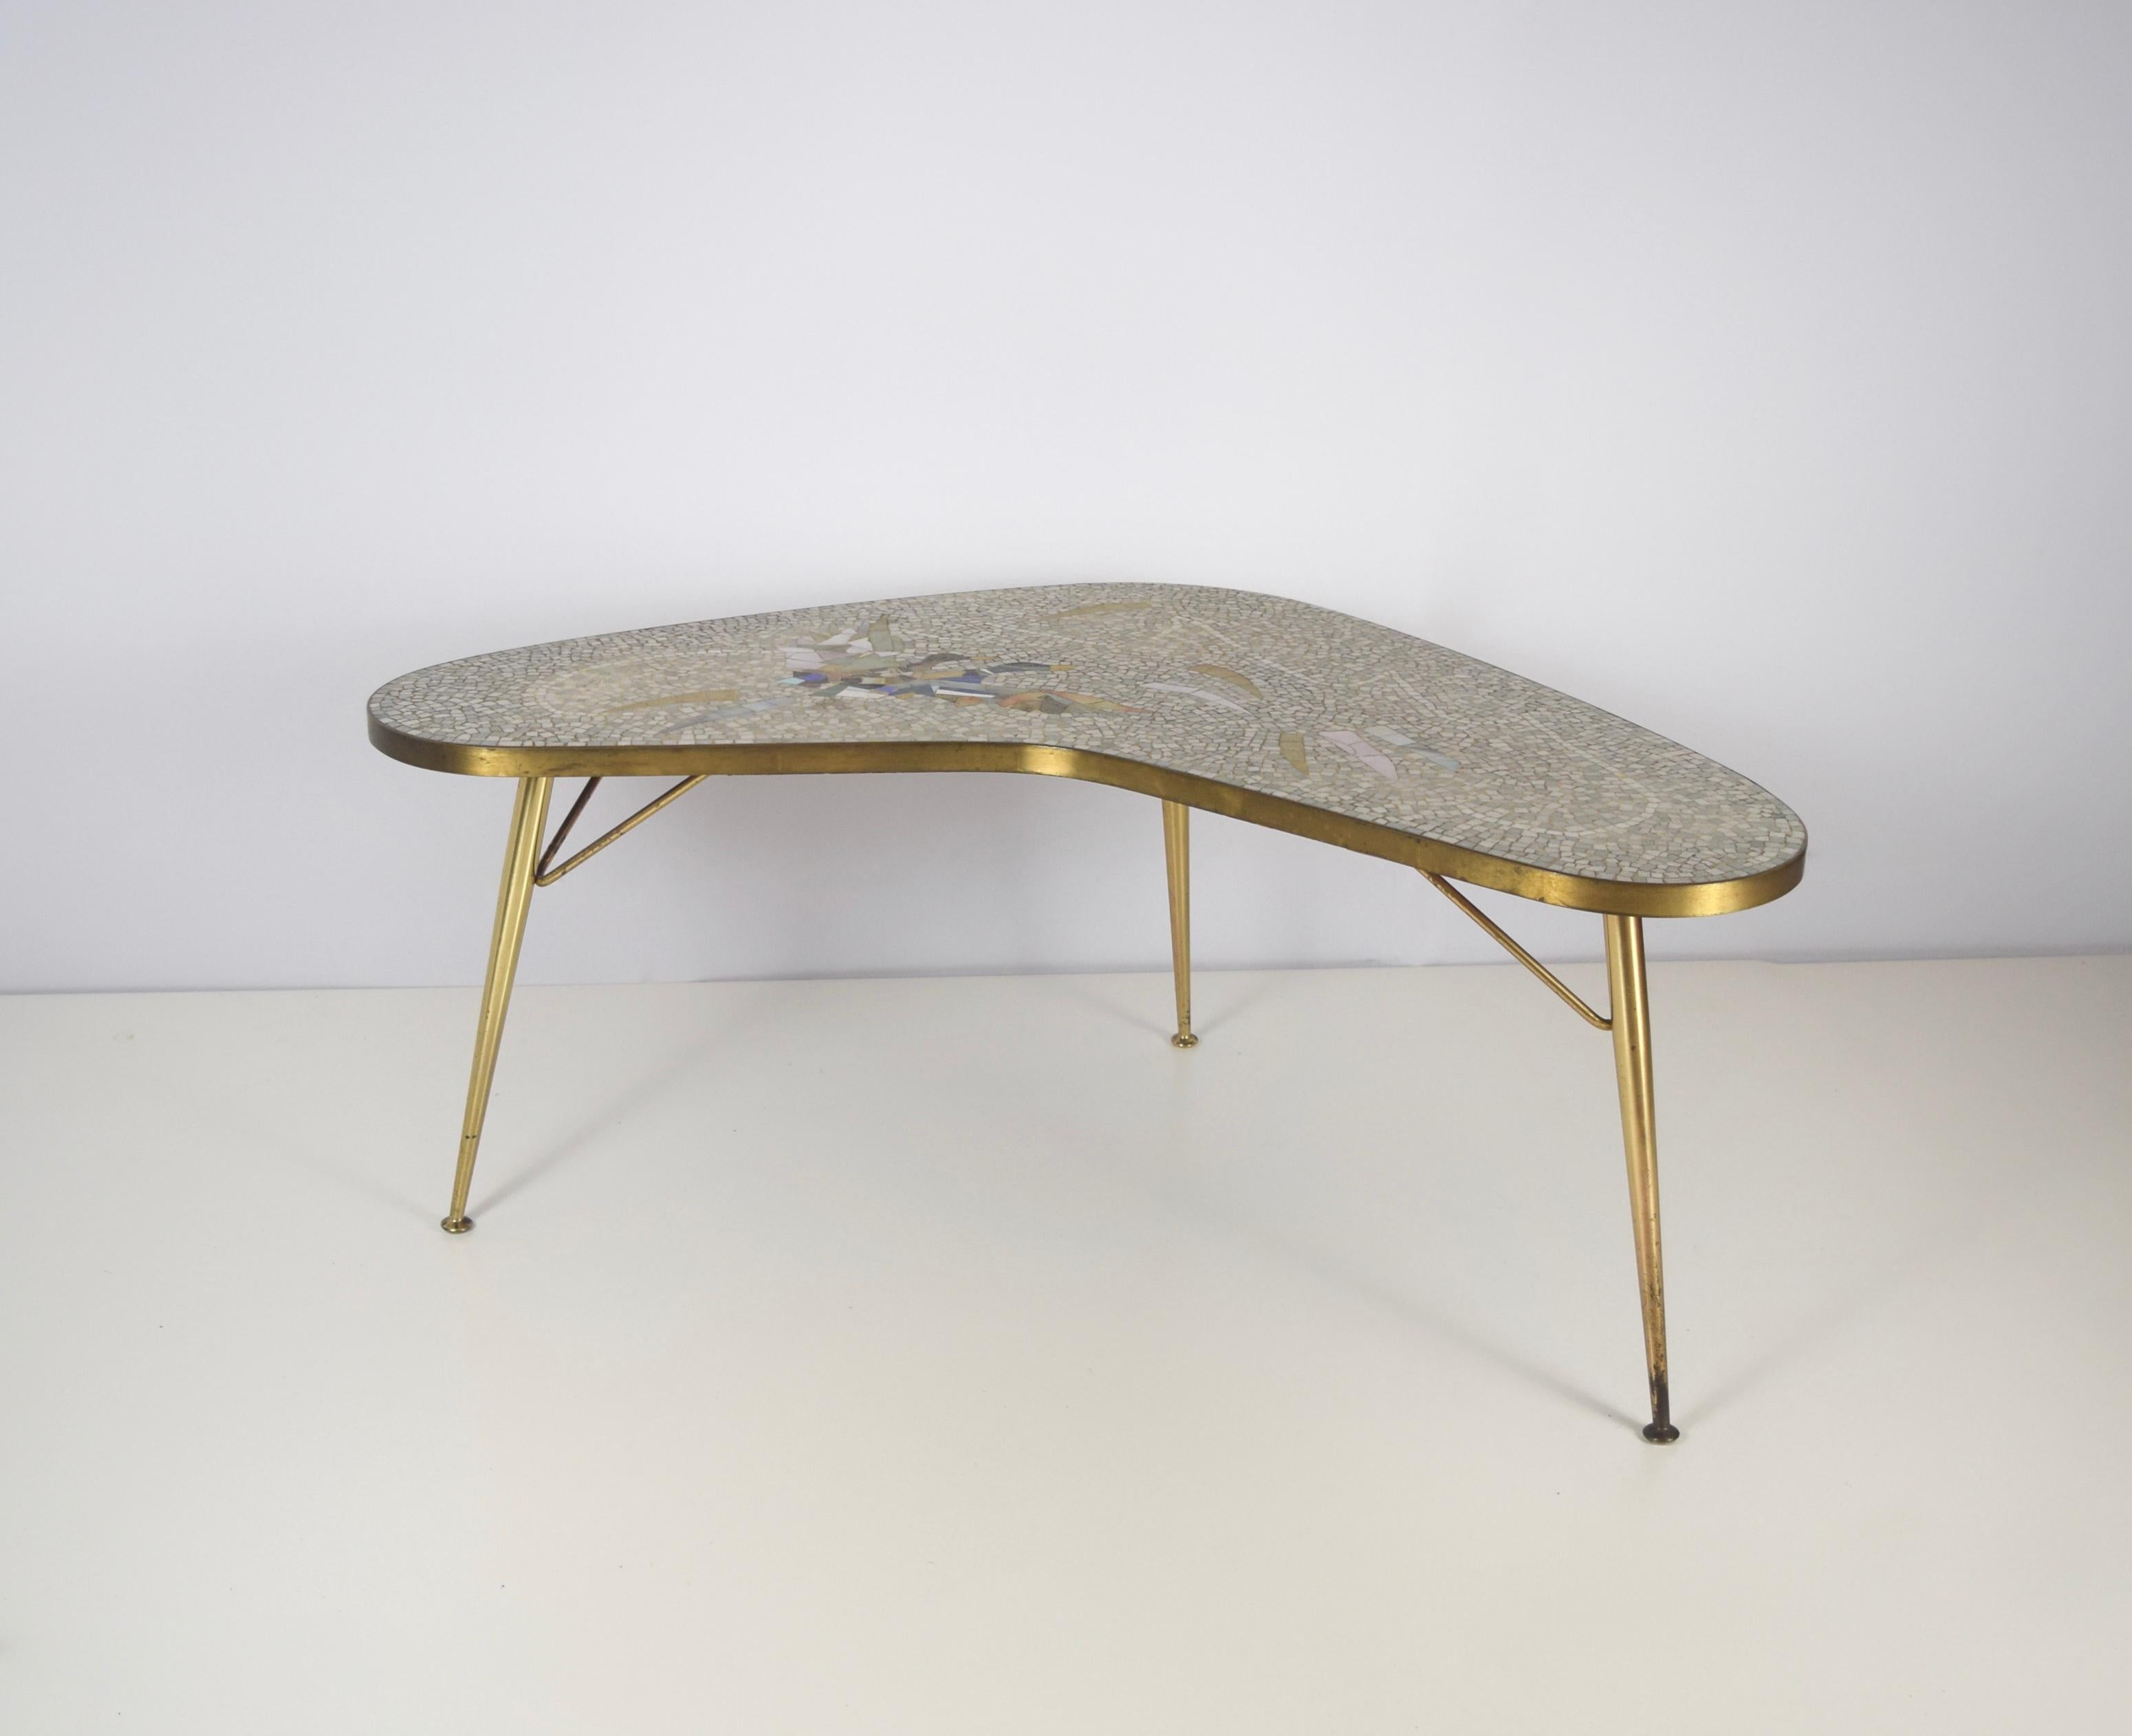 Stunning Mosaic and Brass Coffee Table by Berthold Müller-Oerlinghausen from Germany 1950s. This boomerang shaped table is in excellent condition. The mosaic pictures two ducks and has a very modern color palette. The brass is very shiny and gives